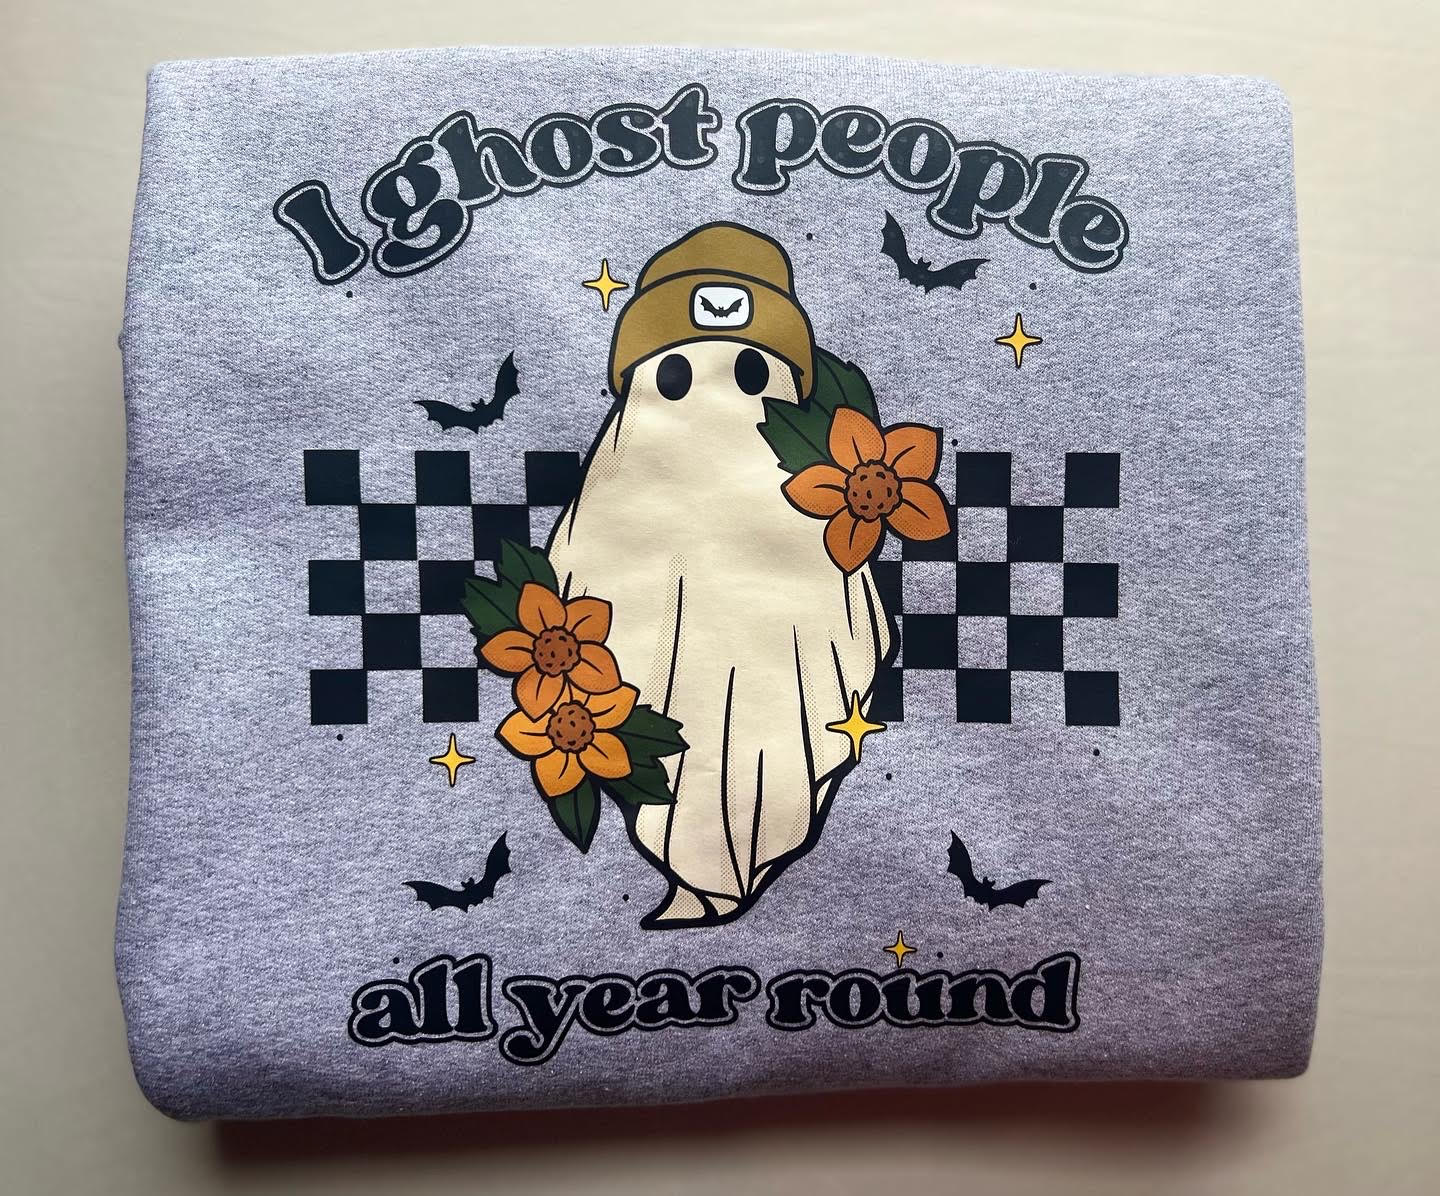 I Ghost People All Year Round Crewneck